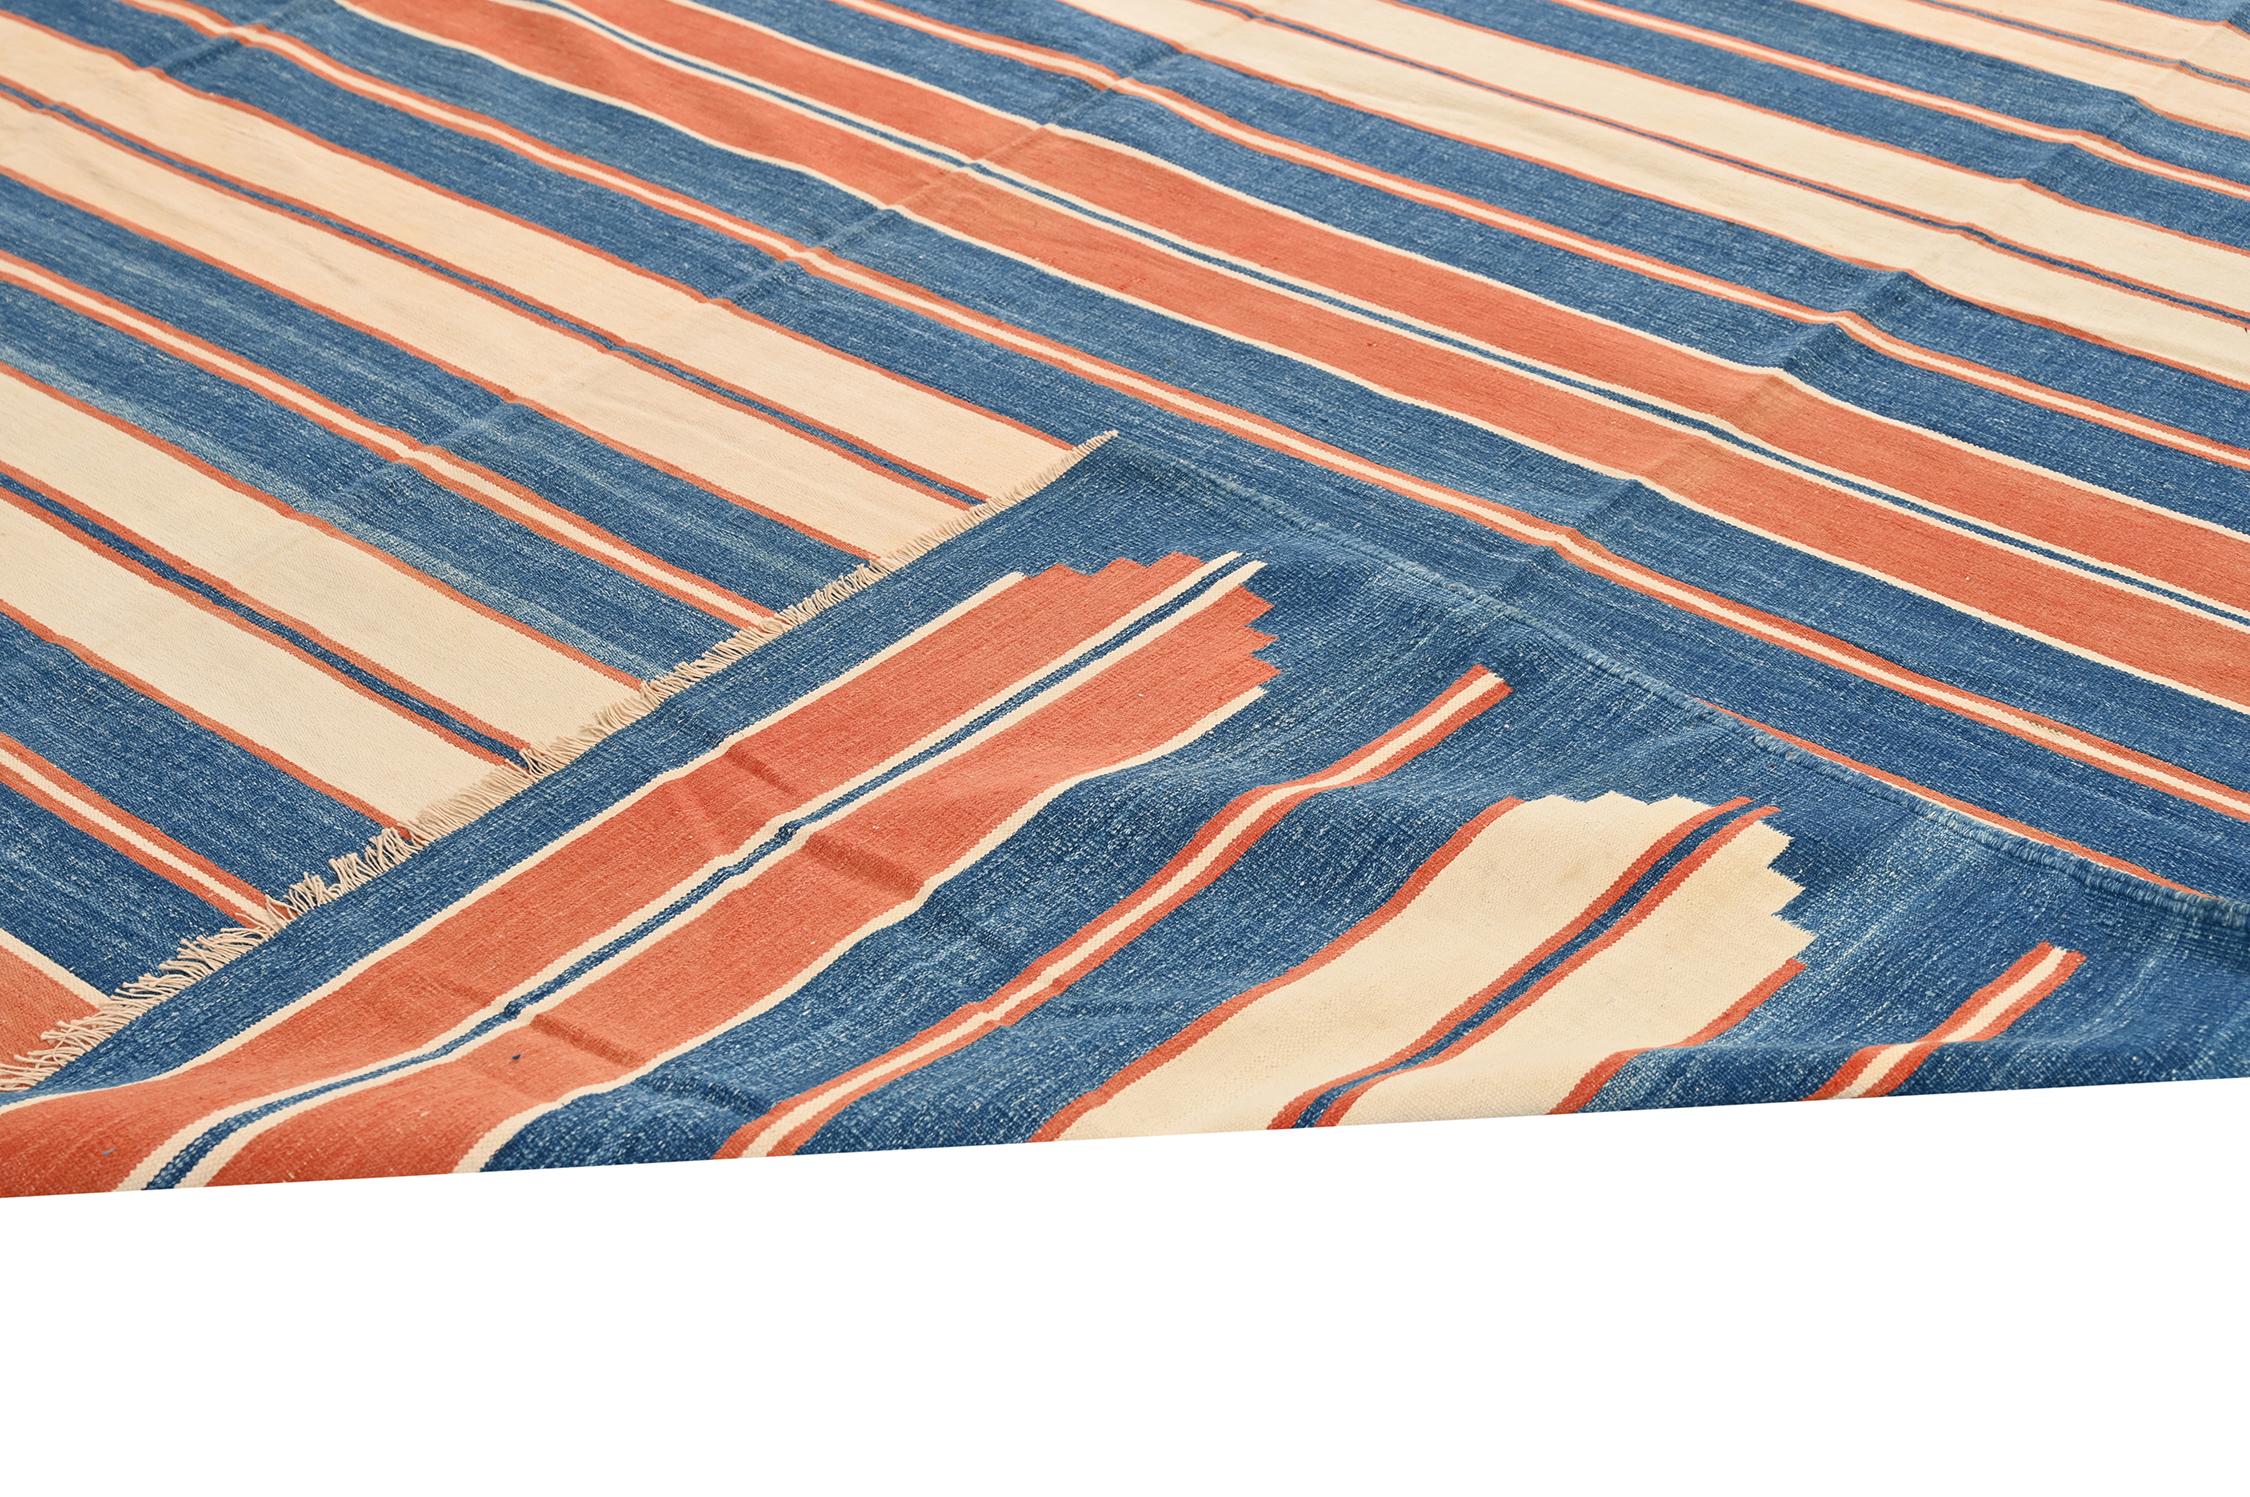 Cotton Vintage Dhurrie Flat Weave in Blue and Orange Stripes Patterns by Rug & Kilim For Sale